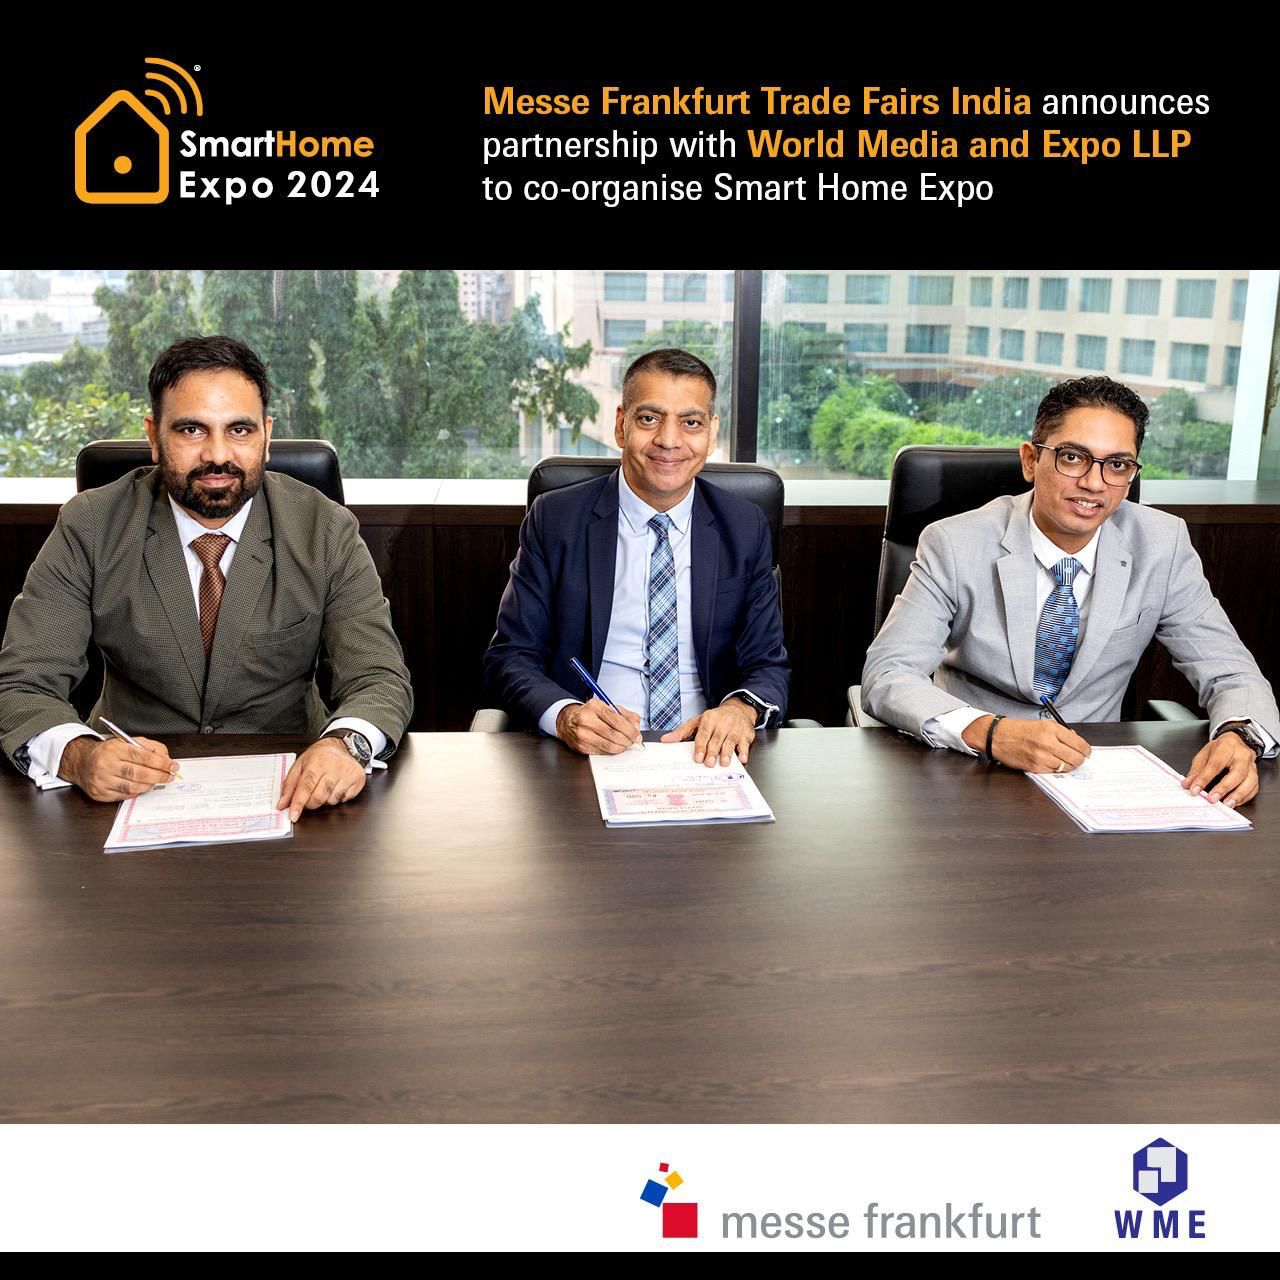 World Media and Expo LLP announces partnership with Messe Frankfurt Trade Fairs India to co-organise Smart Home Expo